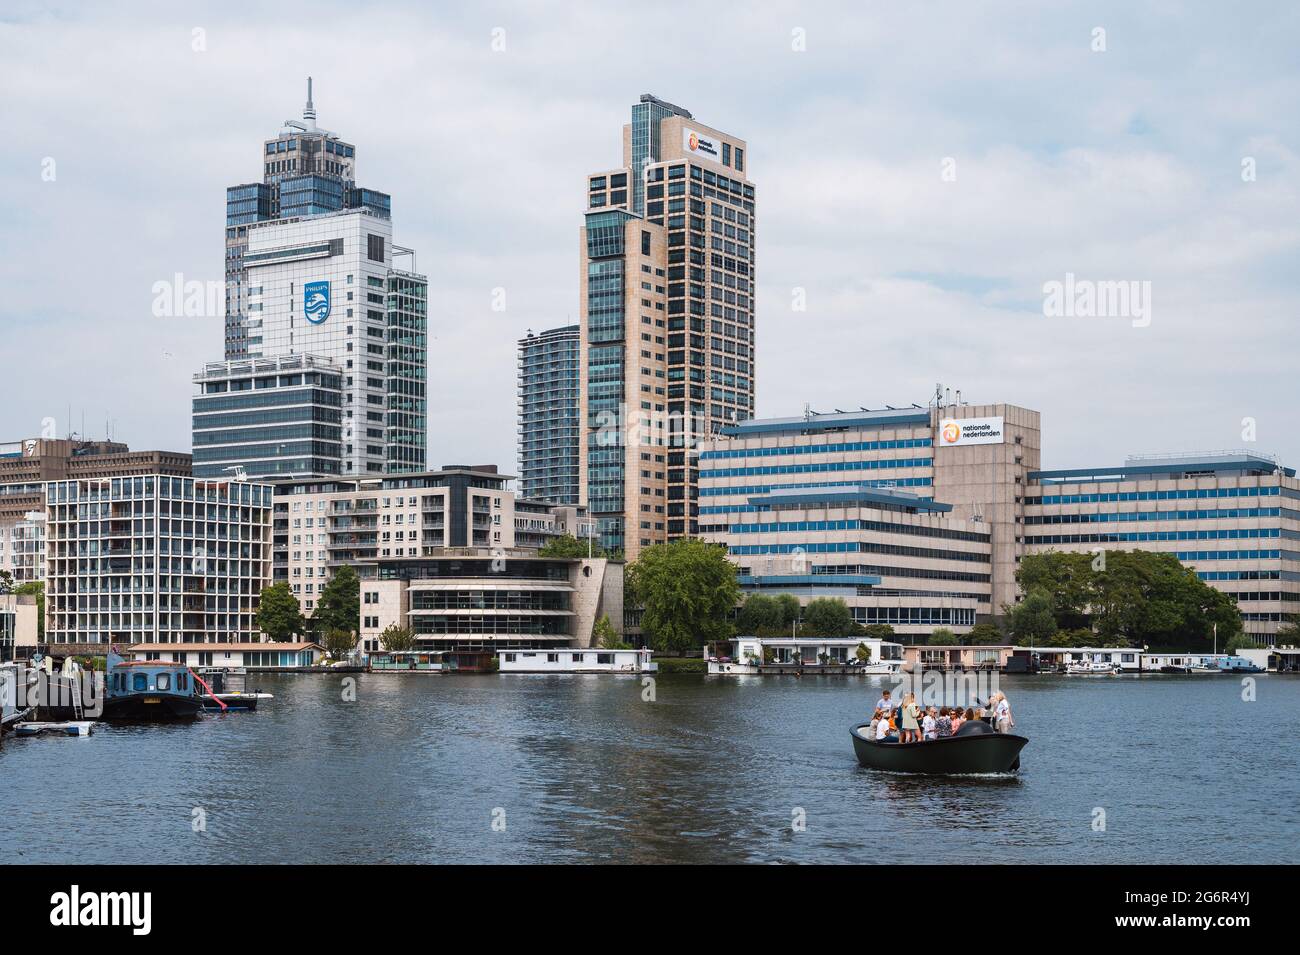 Amsterdam, Netherlands - June 26 2021: Philips headquarters photographed from the Amstel river Stock Photo